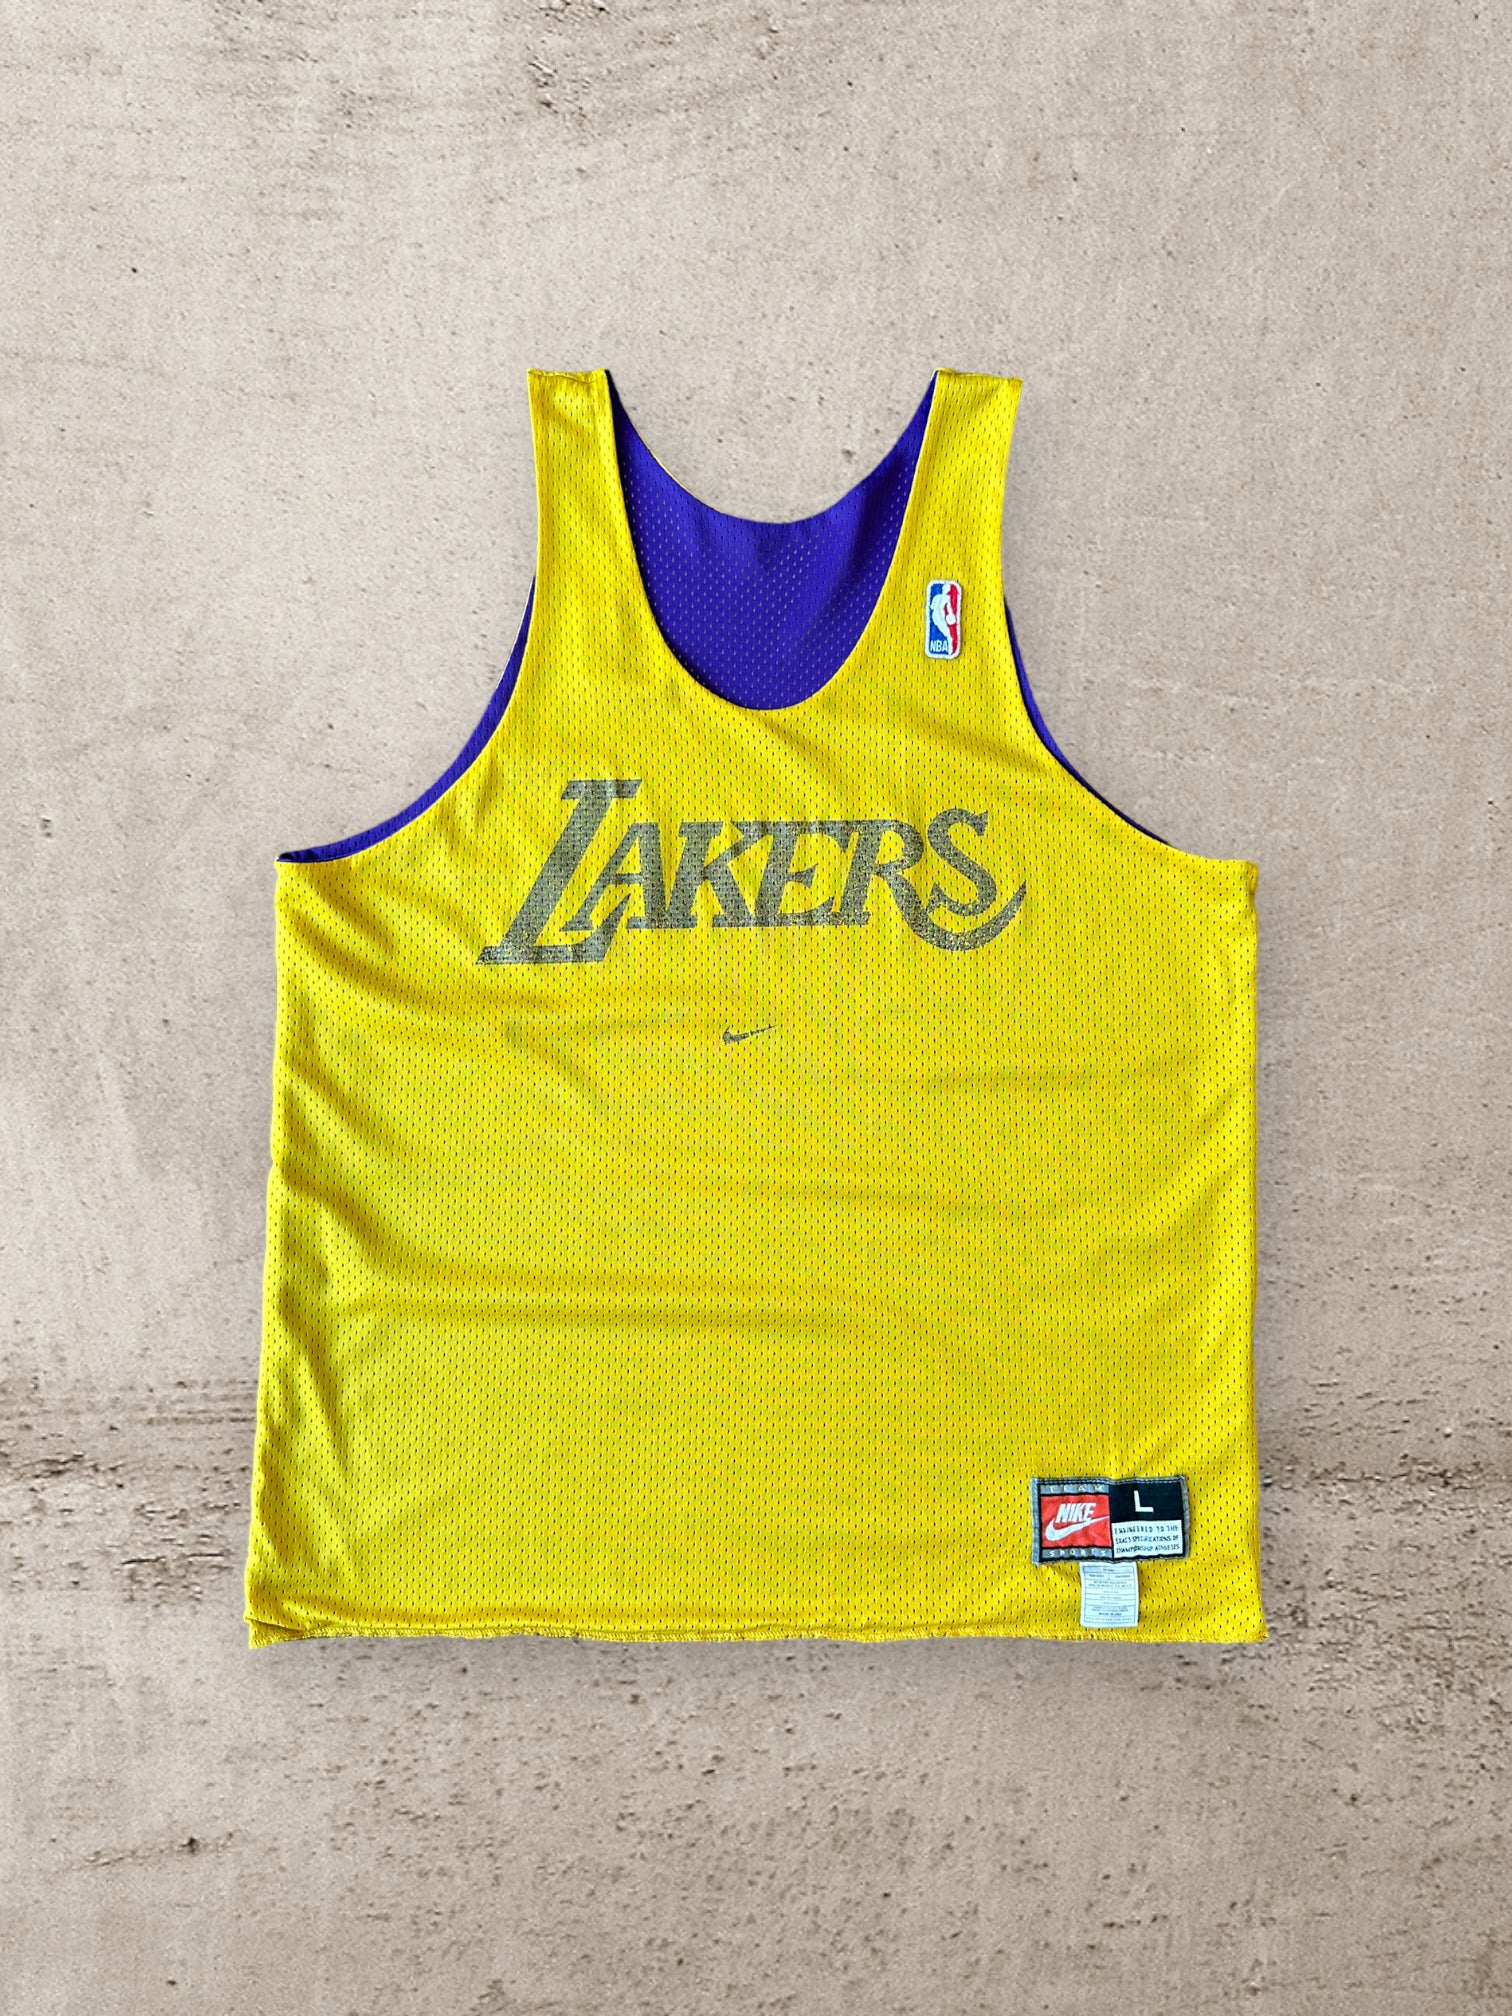 90s Nike Team Lakers Mesh Warm Up Jersey - Large